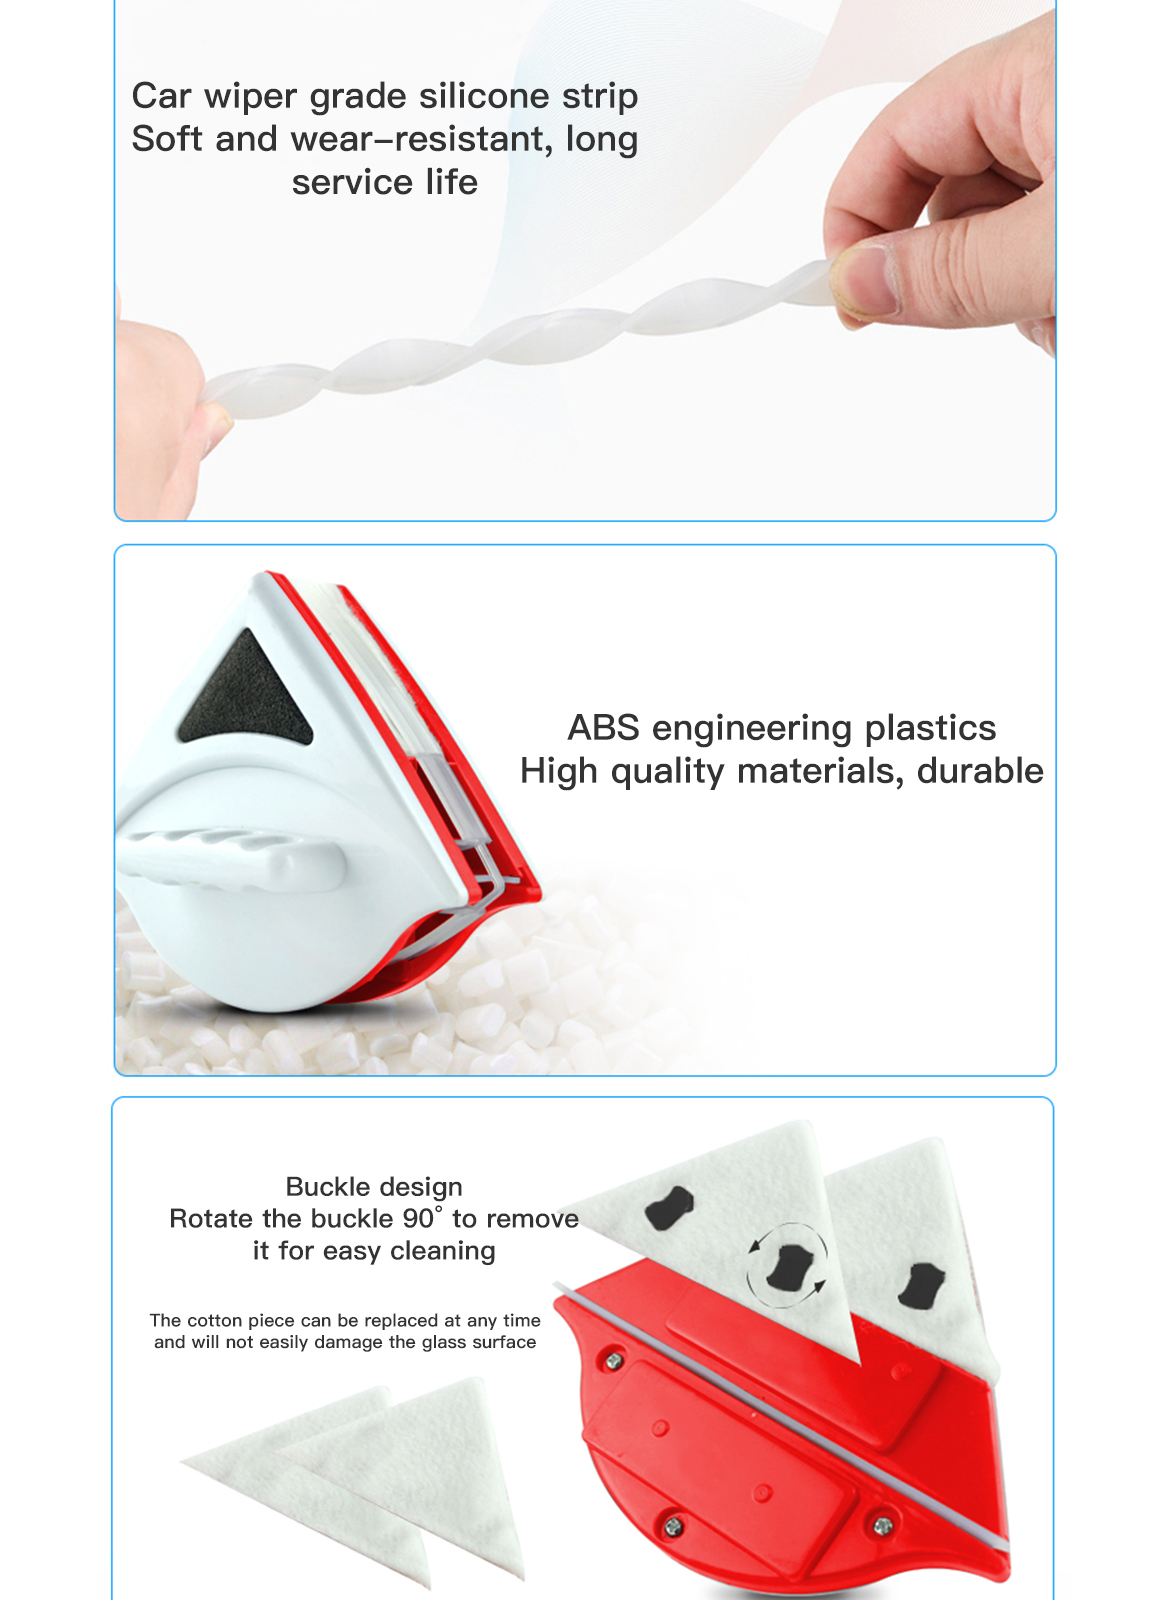 Classic Triangle Magnetic Window Cleaner for Cleaning Windows,Suitable for 15-24mm Double-layer Insulating Glass